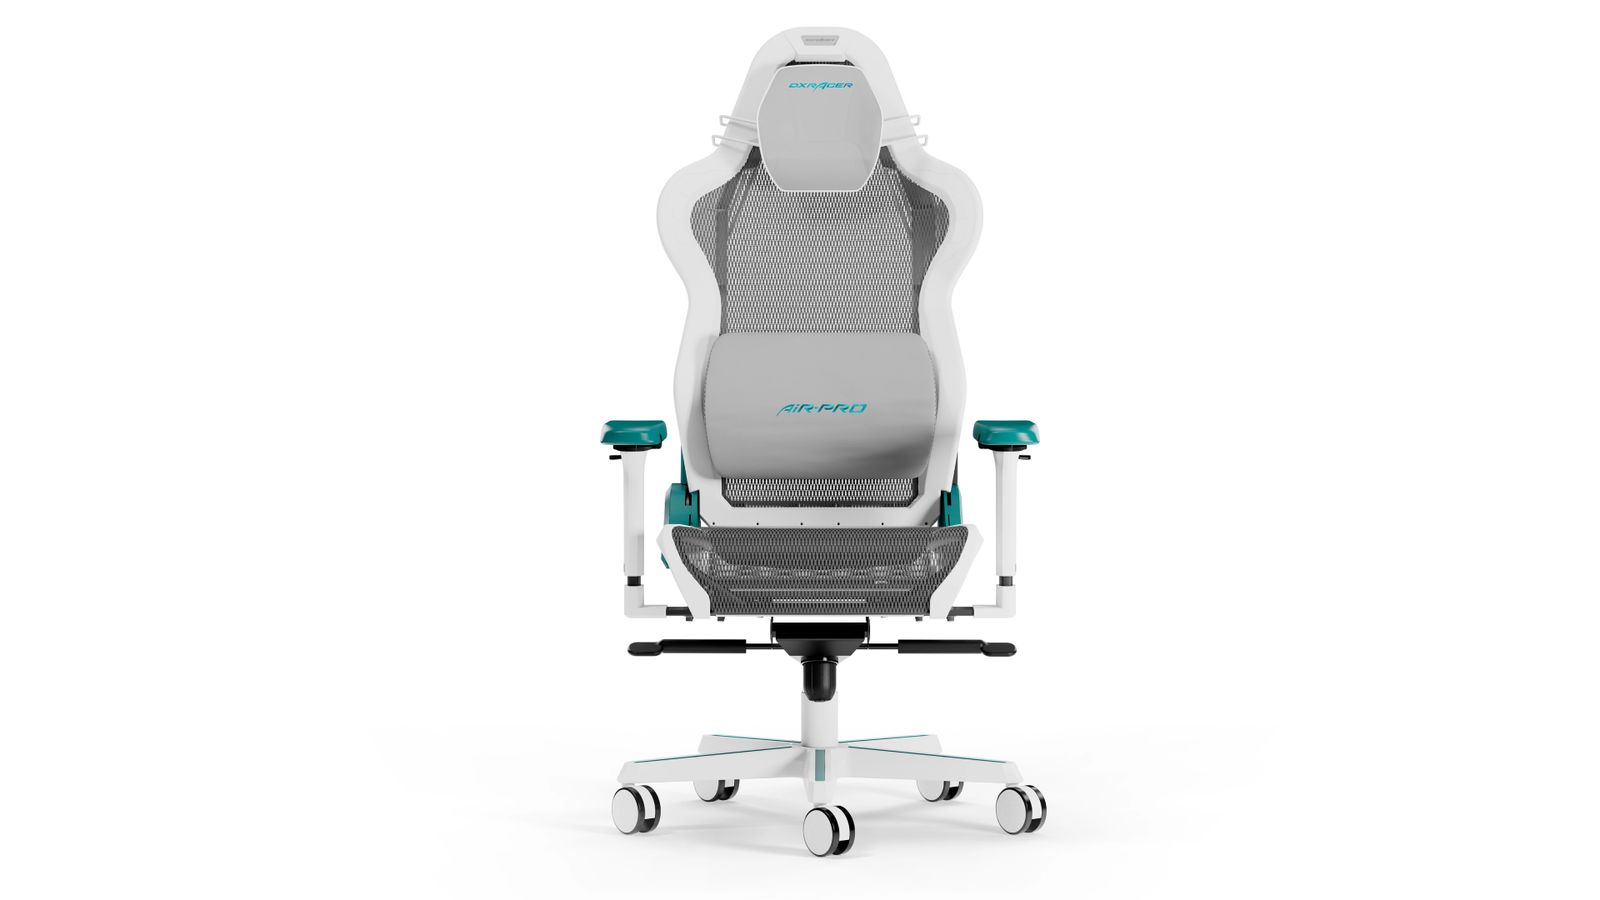 DXRacer Air R1S-WQG product image of a white and grey gaming chair featuring turquoise details.